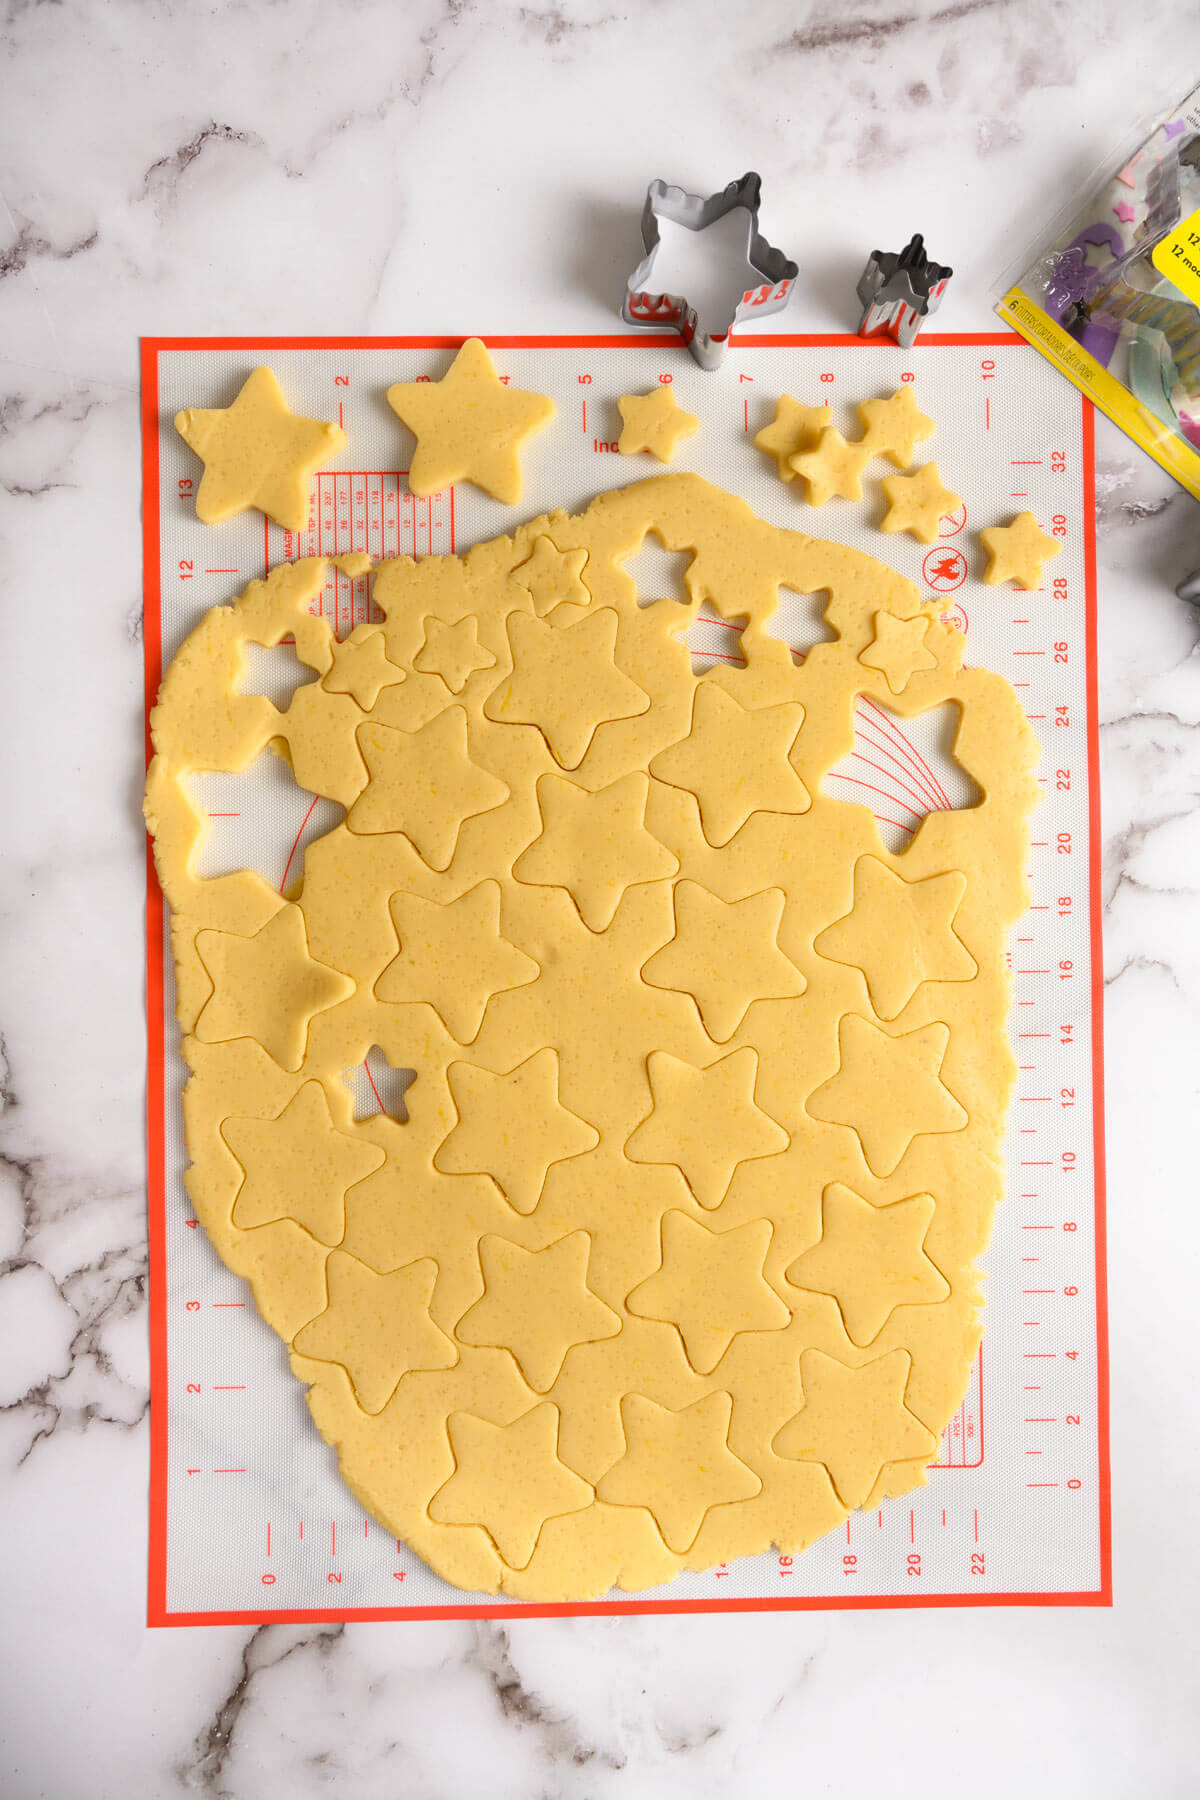 Rolled dough with cut out star shaped cookies of varying sizes.